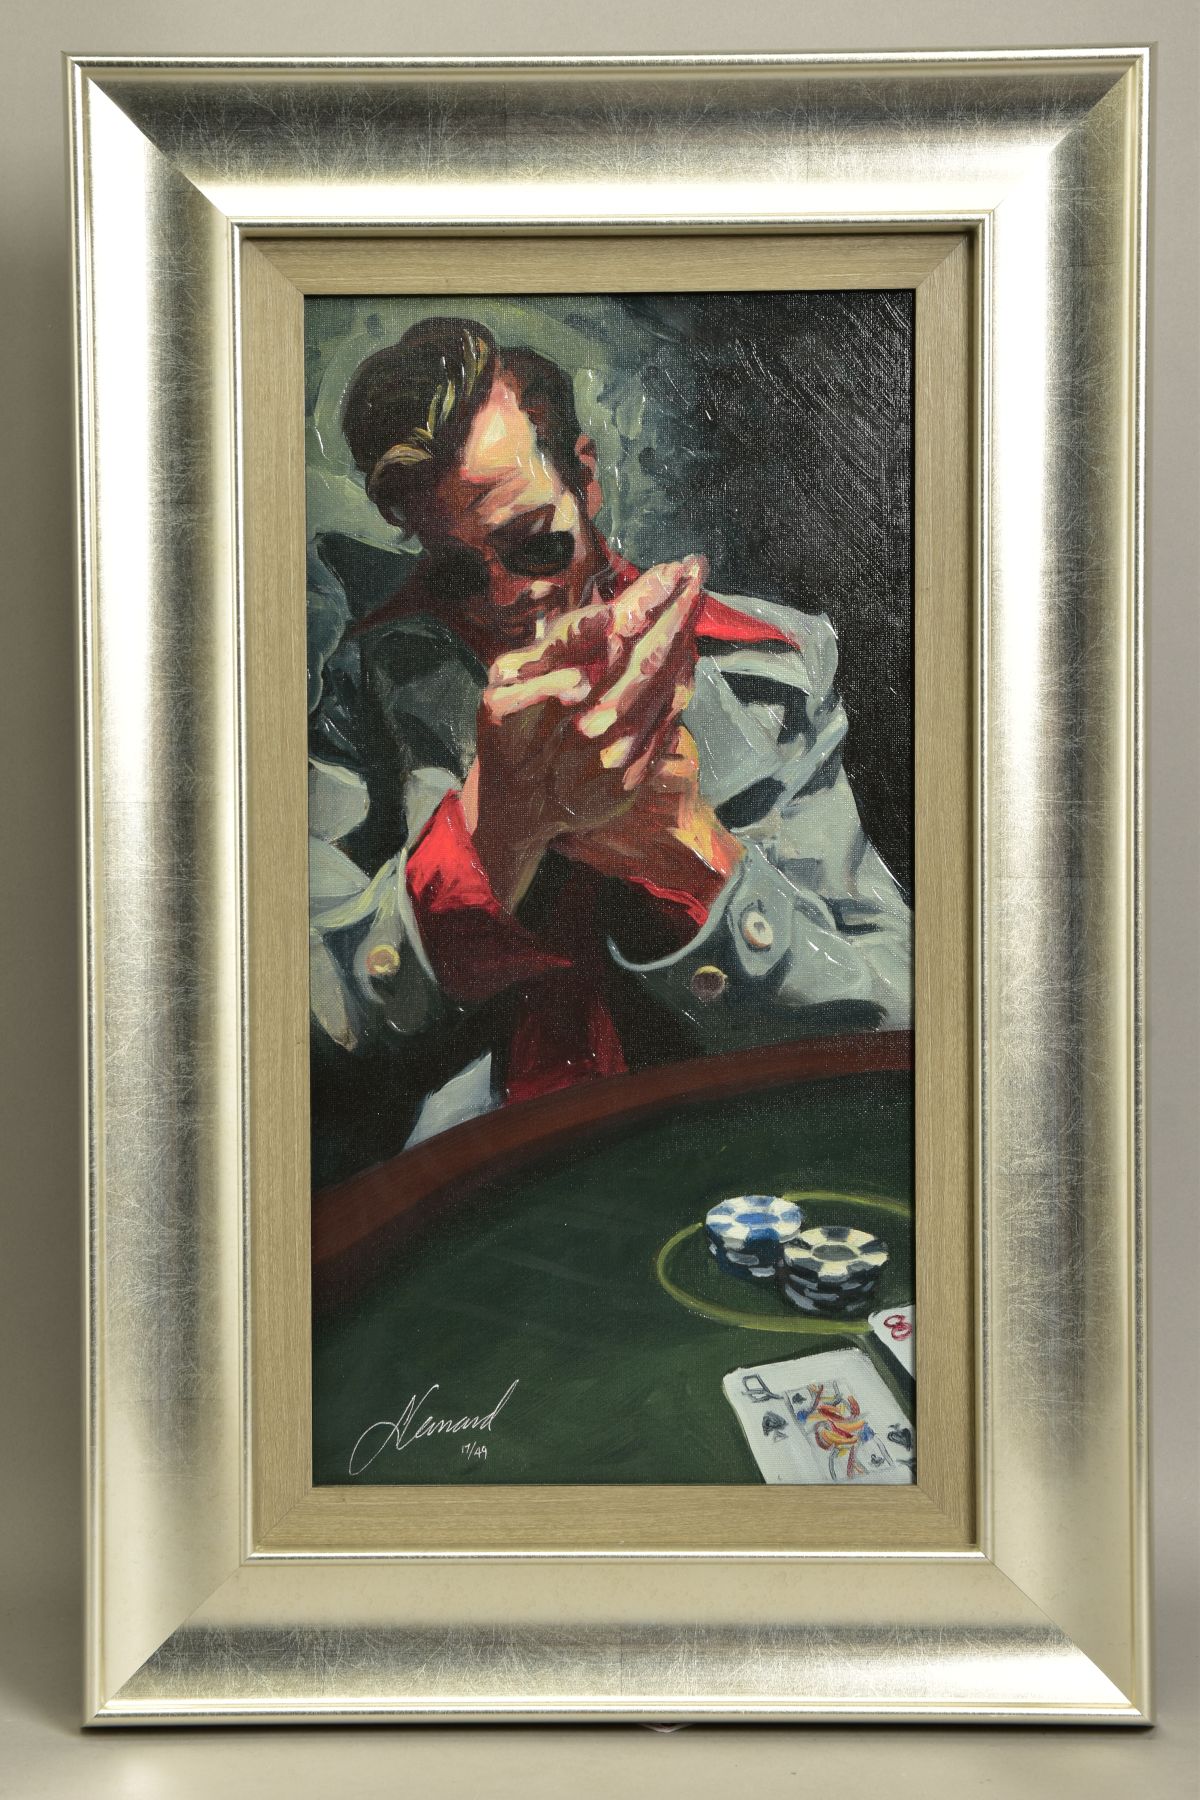 GABE LEONARD (AMERICAN CONTEMPORARY) 'THE PROFESSIONAL' a limited edition print of a gambler playing